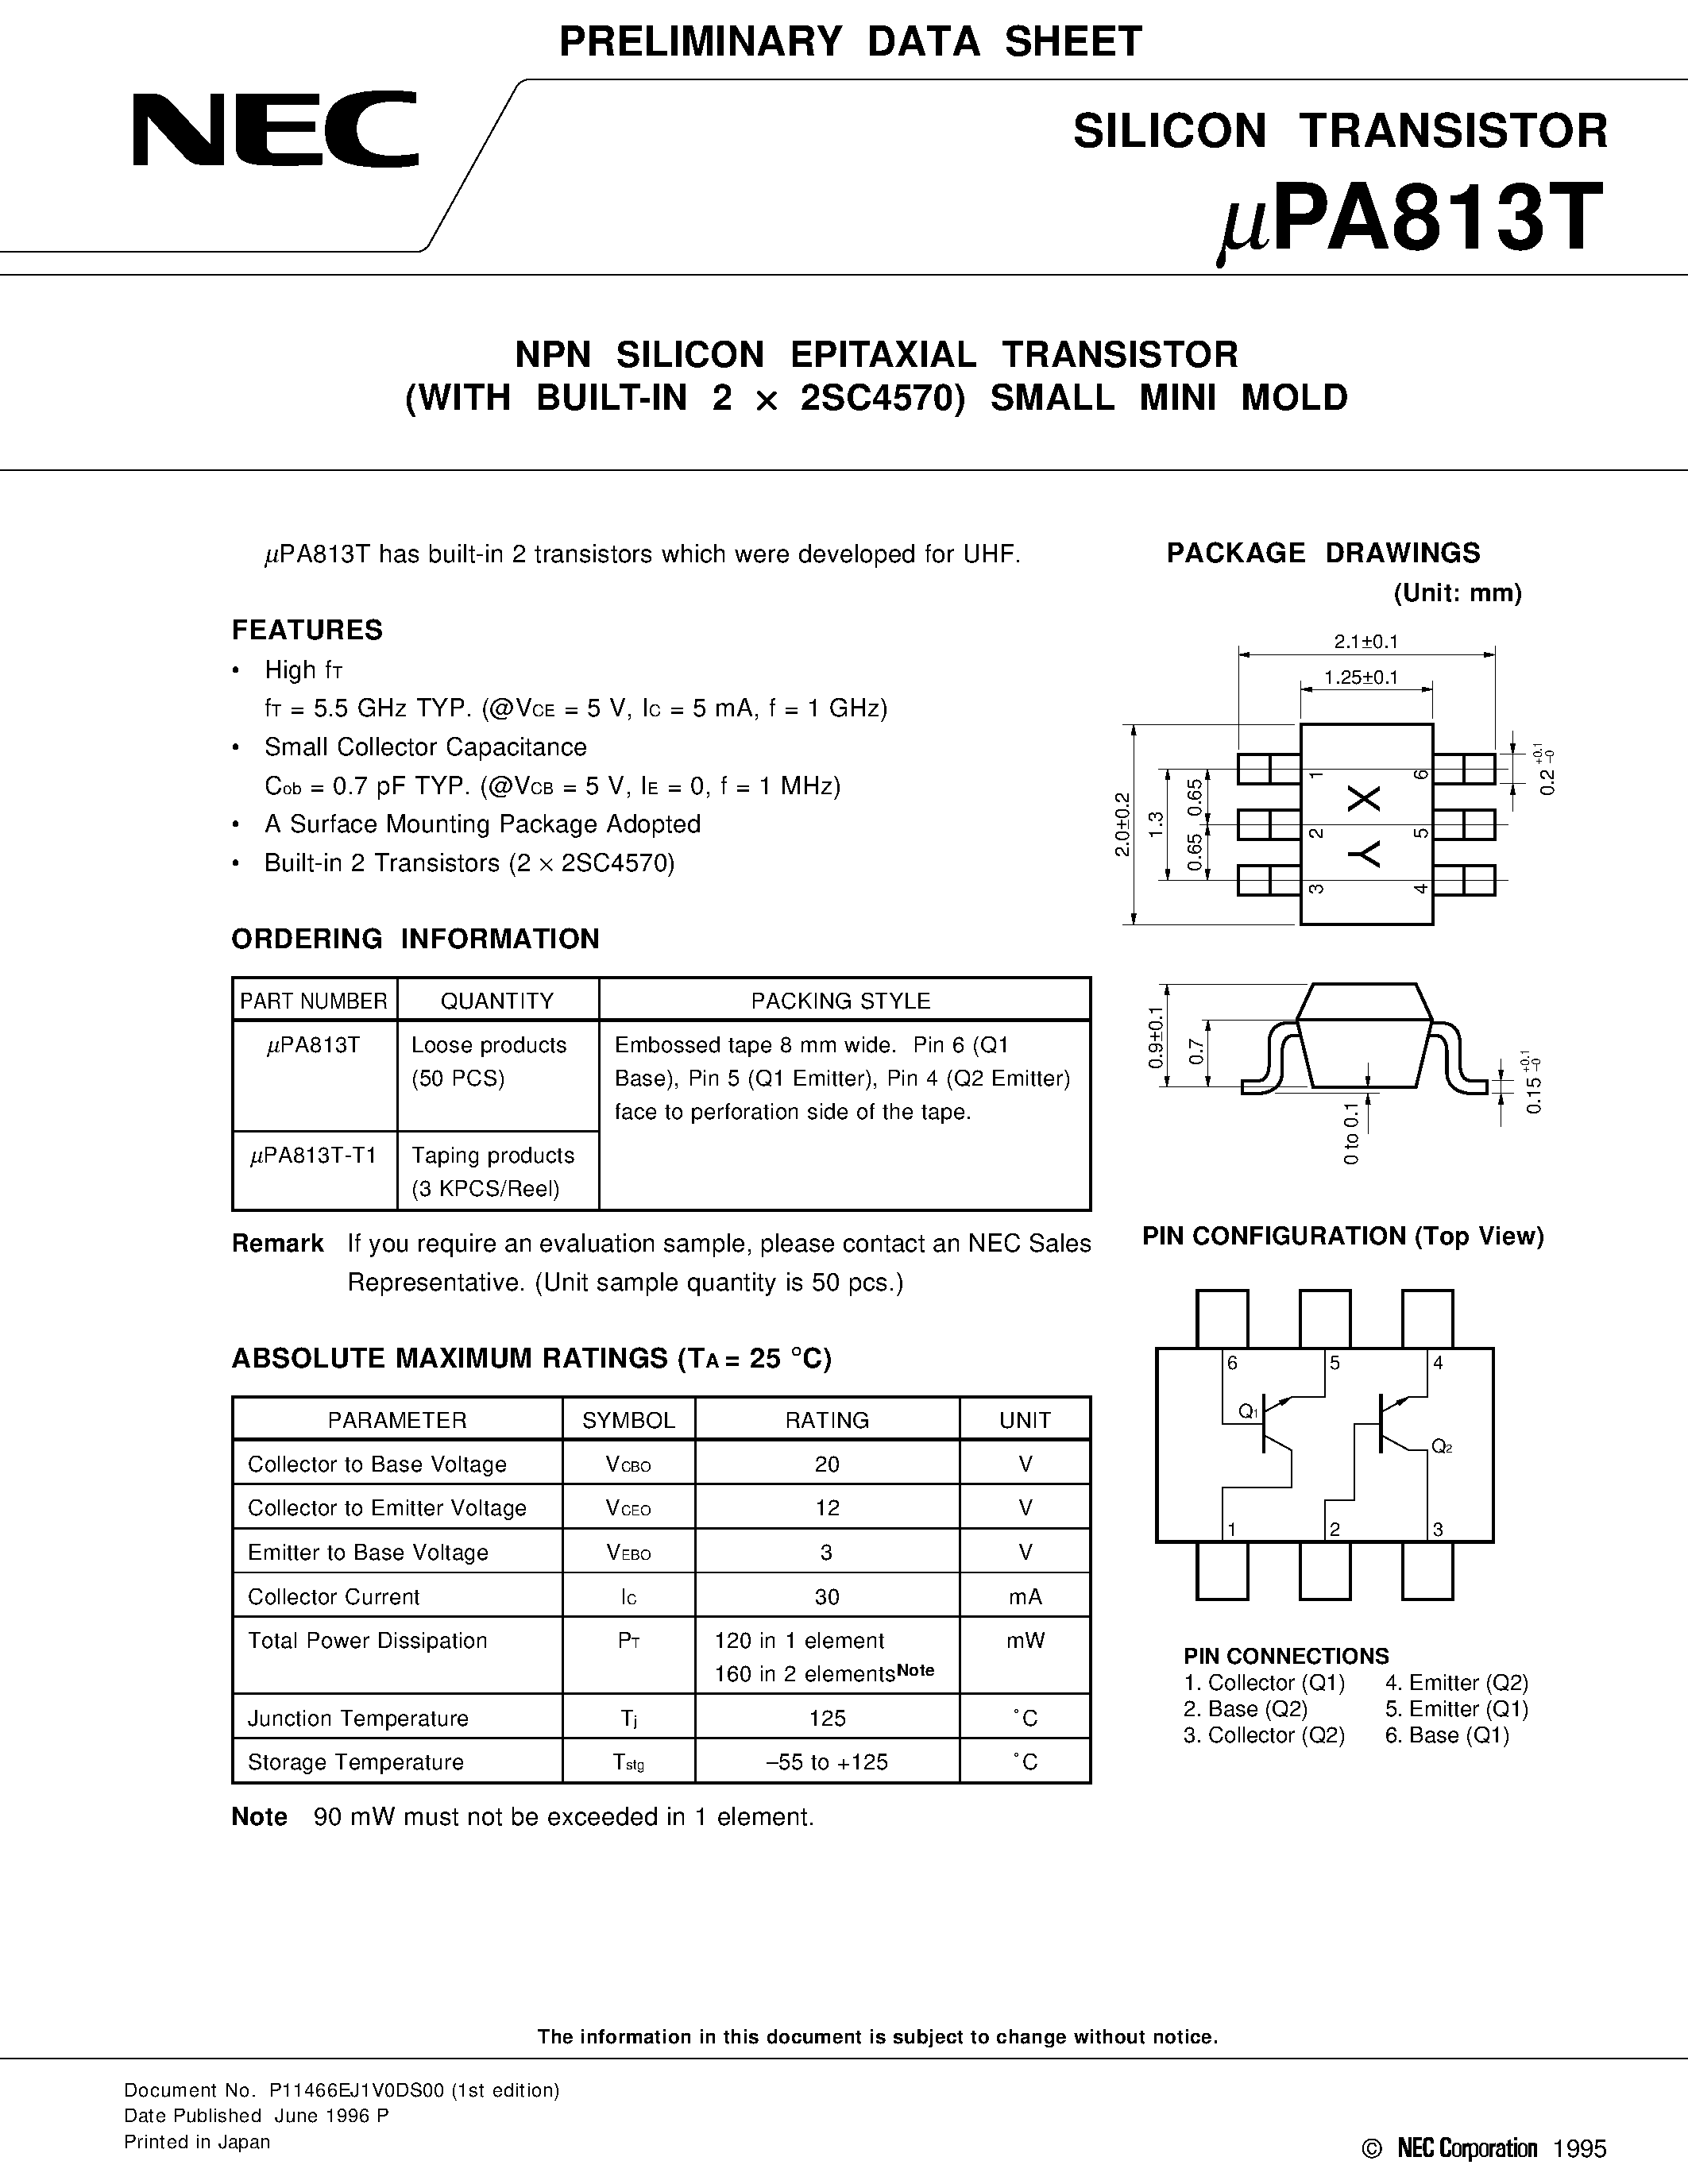 Datasheet UPA813 - NPN SILICON EPITAXIAL TRANSISTOR WITH BUILT-IN 2 x 2SC4570 SMALL MINI MOLD page 1